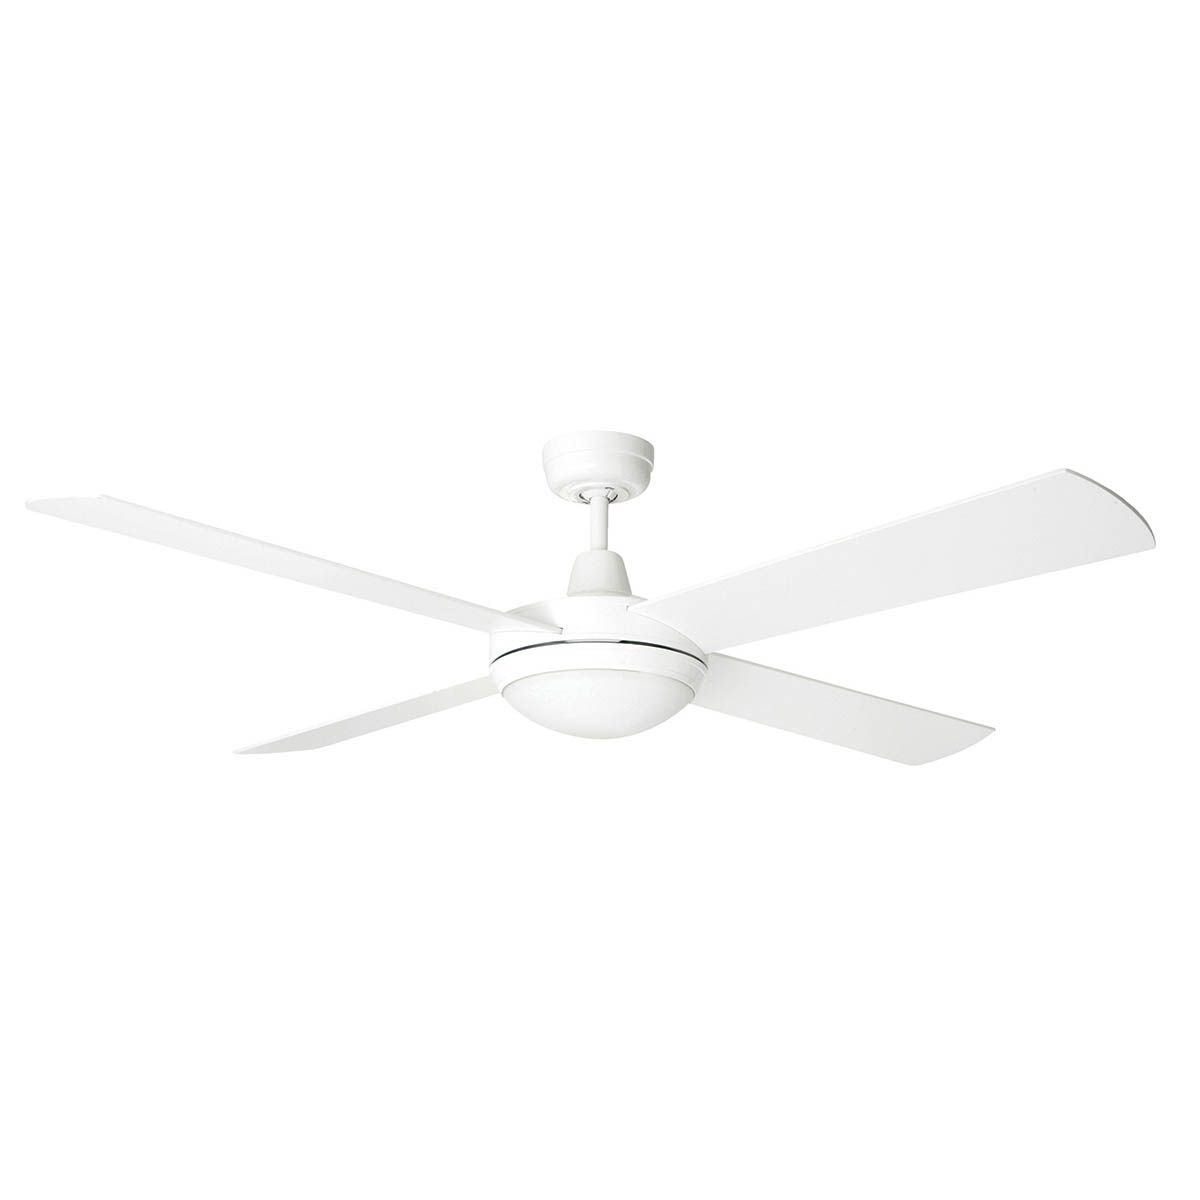 Brilliant 1200mm (48") STORM48 4 Blade Ceiling Sweep Fan With Plywood Blades White